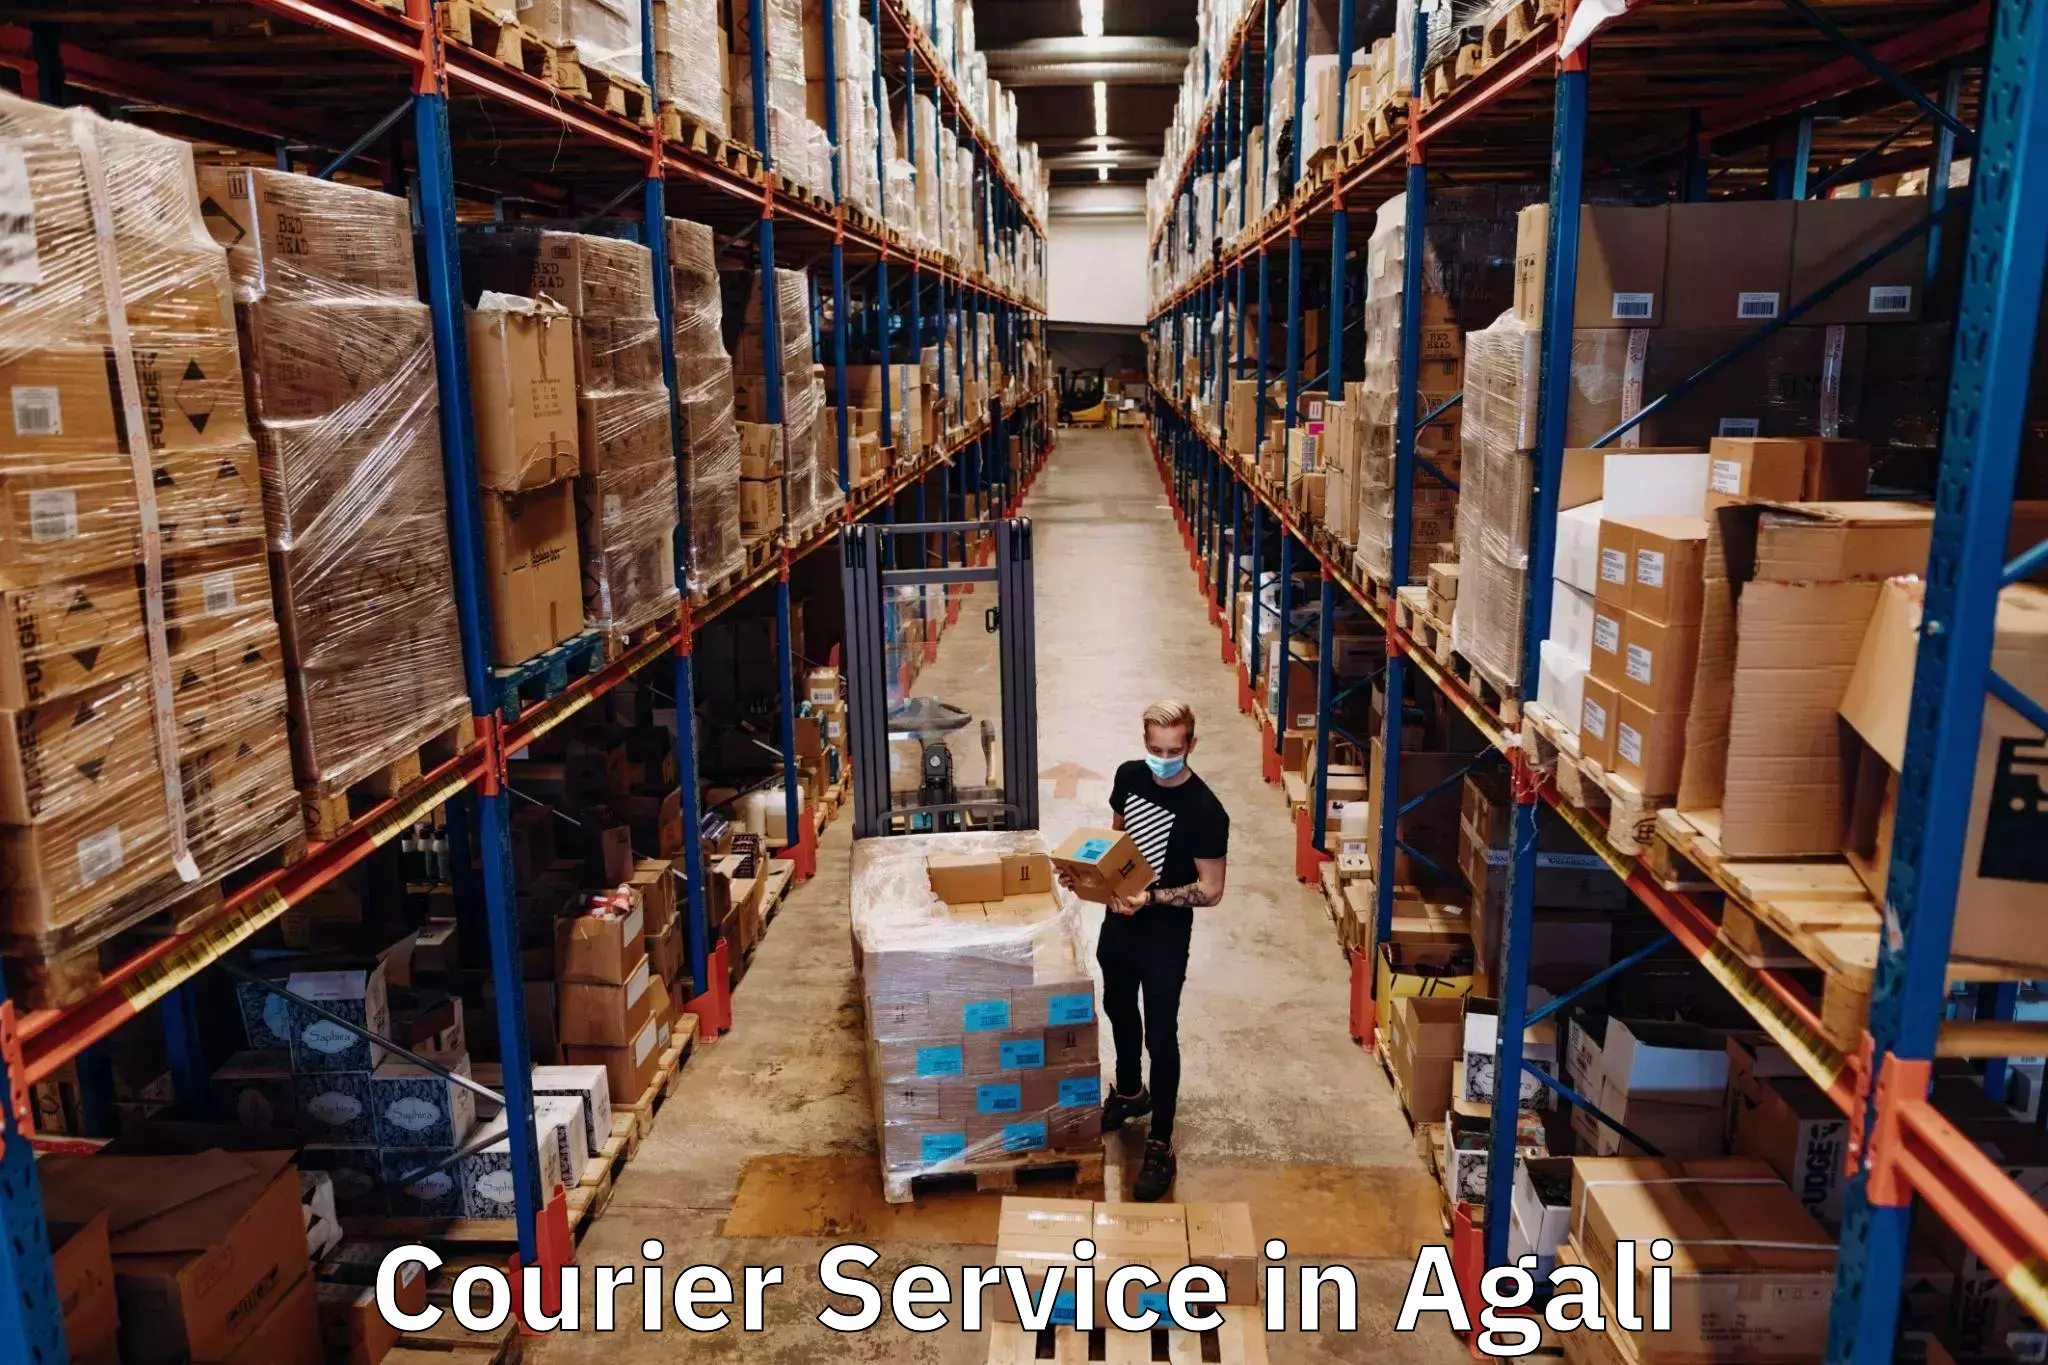 Multi-service courier options in Agali